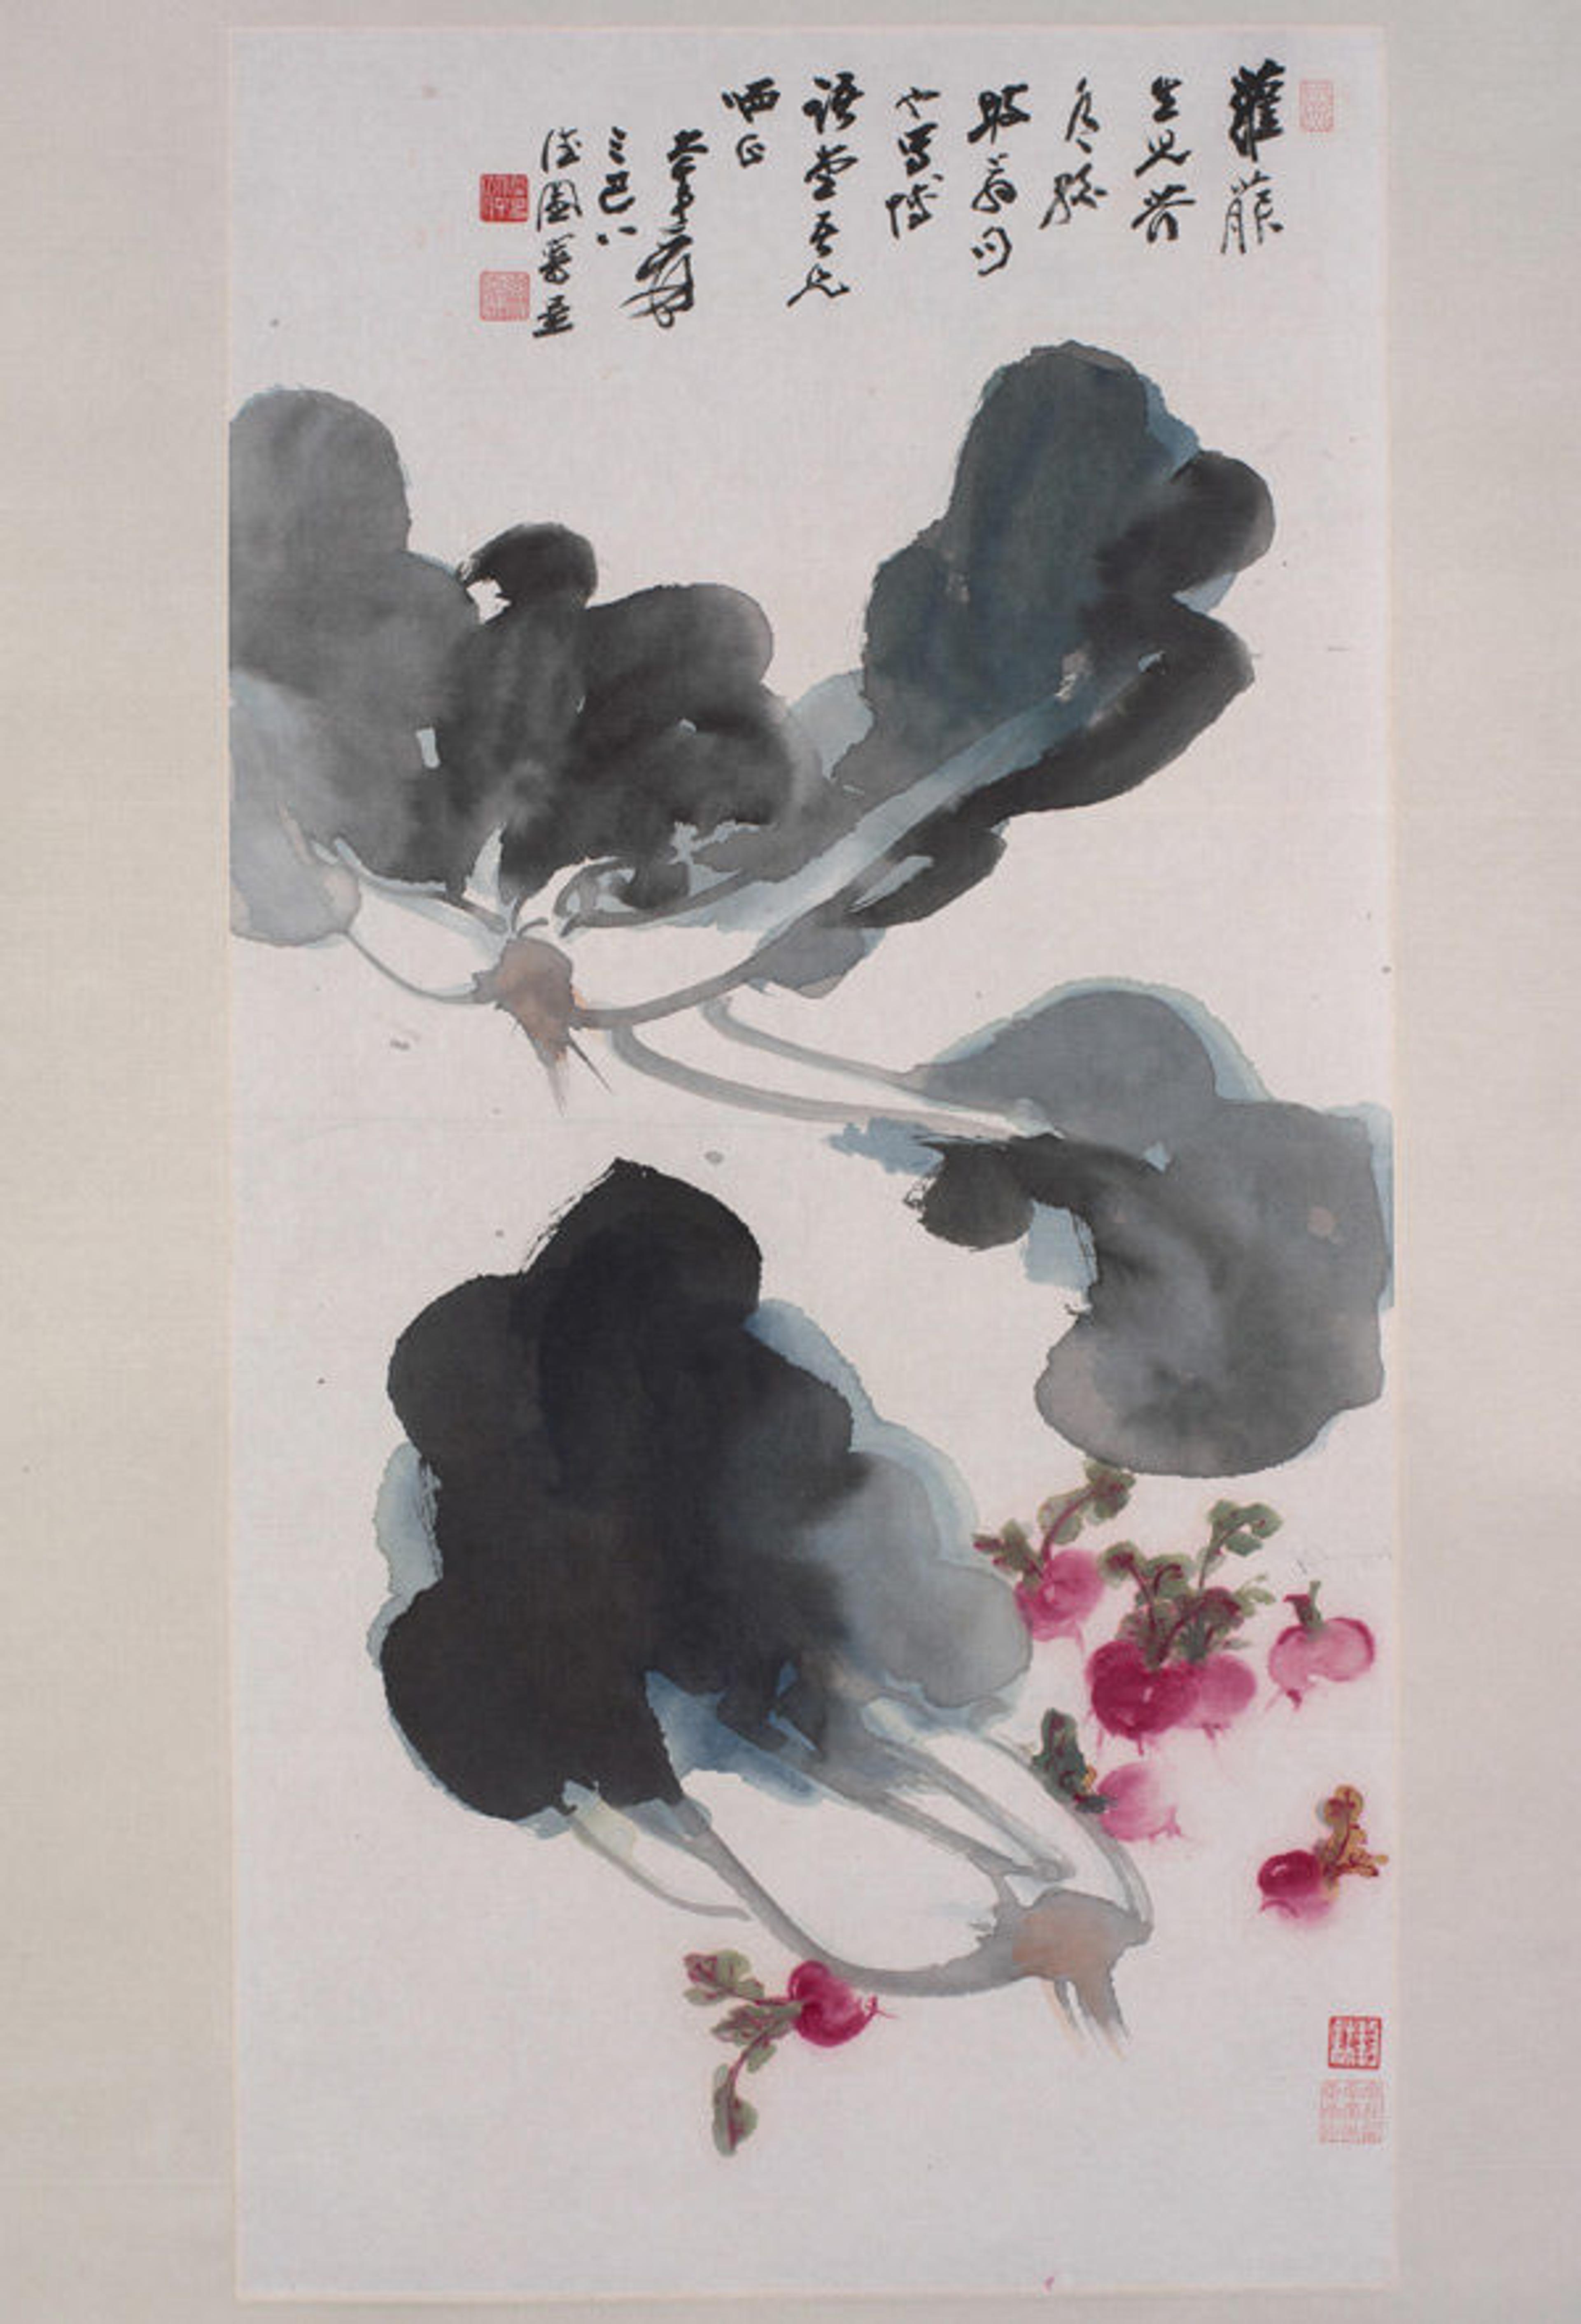 Zhang Daqian (Chinese, 1899–1983). Radishes and Mustard Greens, ca. 1965. Republic period. China. Hanging scroll, ink and color on paper; 34 1/4 x 17 5/16 in. (87.0 x 44.0 cm). The Metropolitan Museum of Art, New York, The Lin Yutang Family Collection, Gift of Richard M. Lai, Jill Lai Miller, and Larry C. Y. Lai in memory of Taiyi Lin Lai, 2005 (2005.509.24)